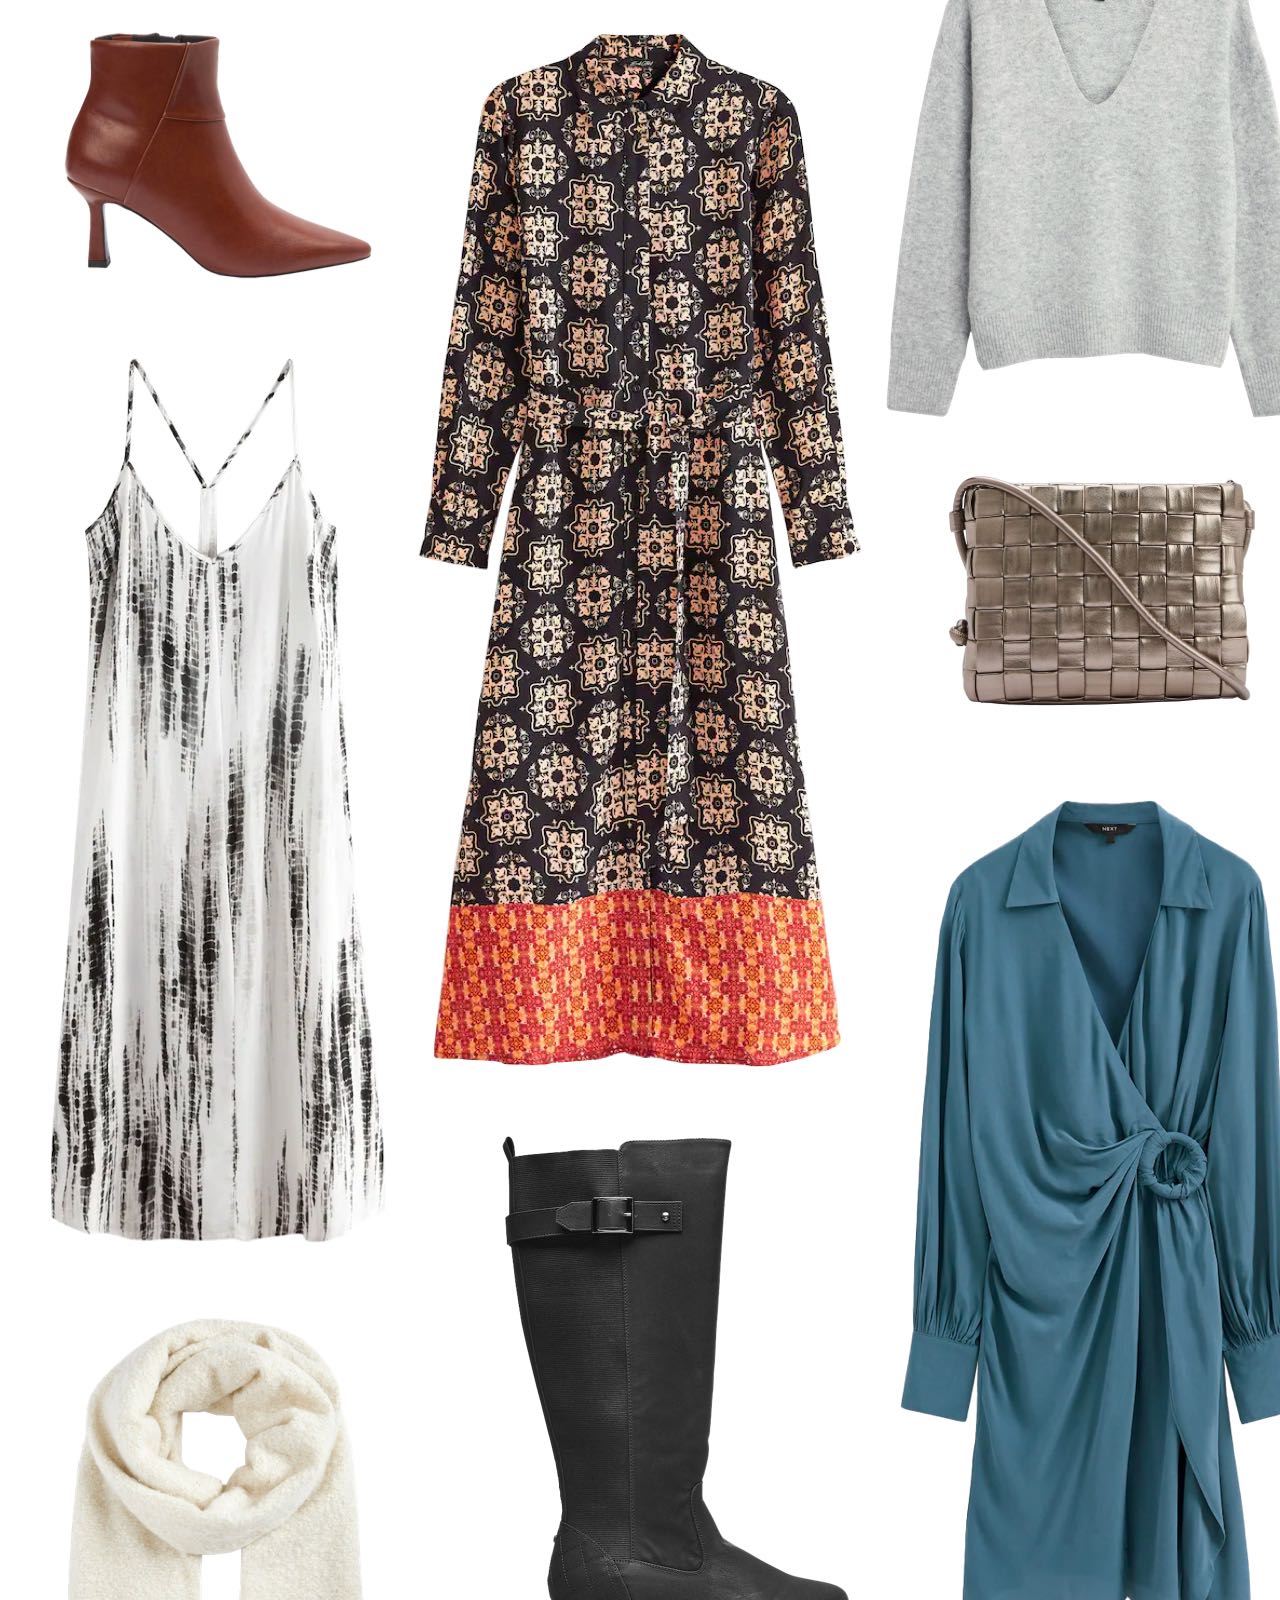 The winter fashion equations: what to wear with boots, Fashion